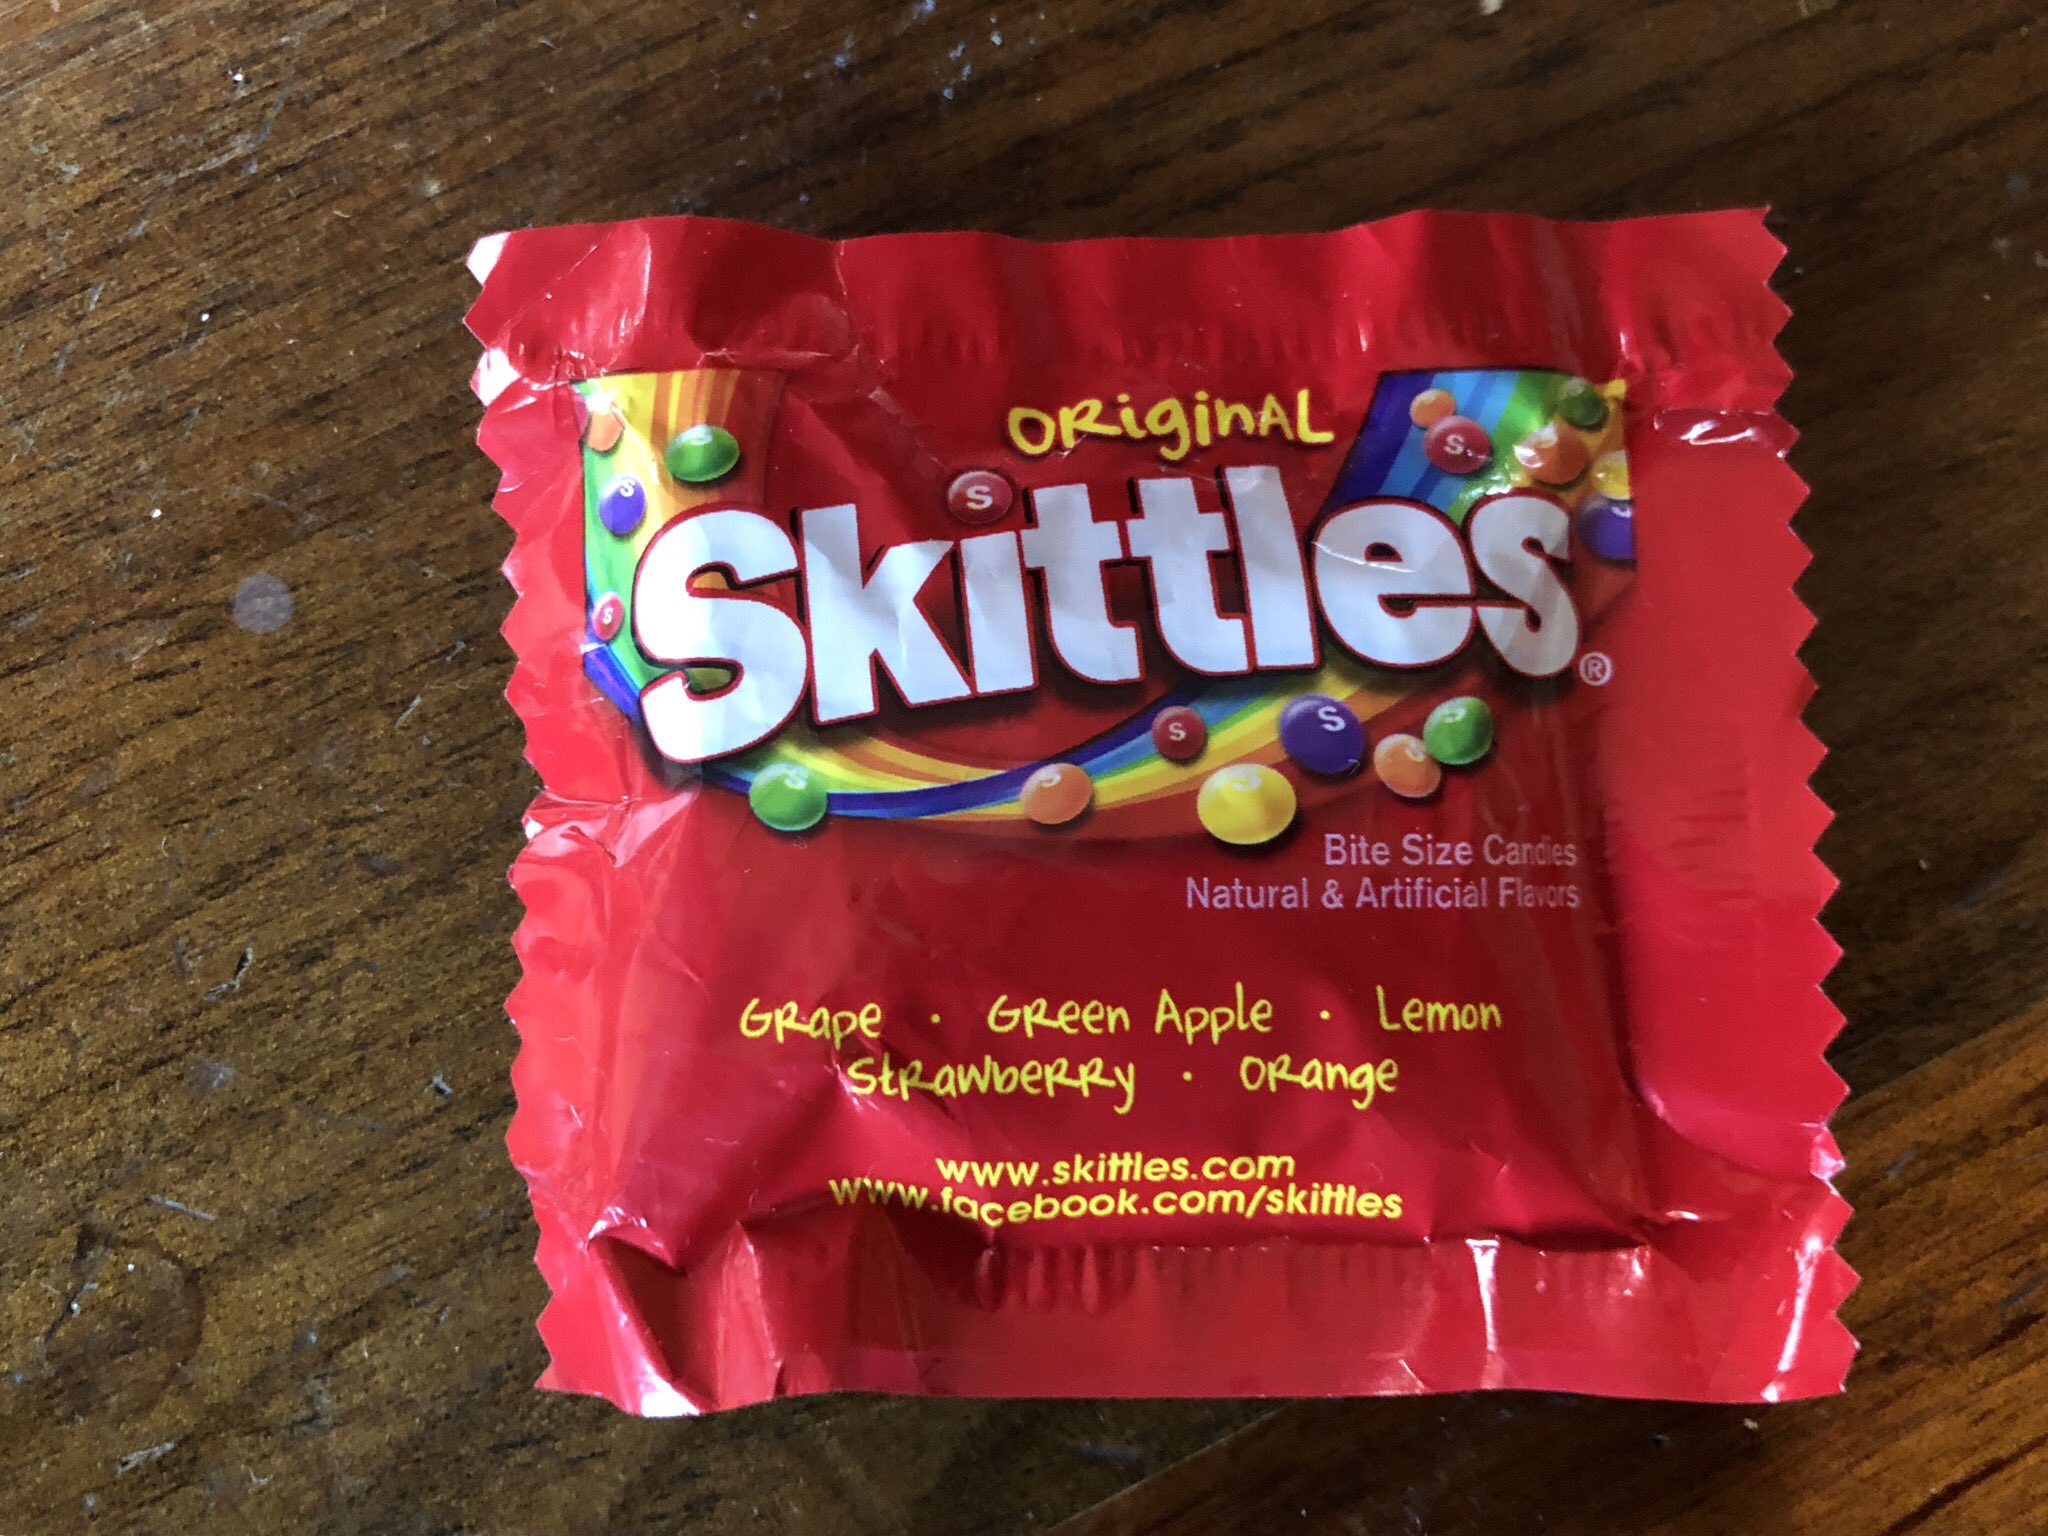 Clem on Twitter: RED BAGS OF SKITTLES SHOULD NOT “ORIGINAL” THE SKITTLE FLAVOR IS GREEN APPLE https://t.co/cU8INpoN4S" / Twitter